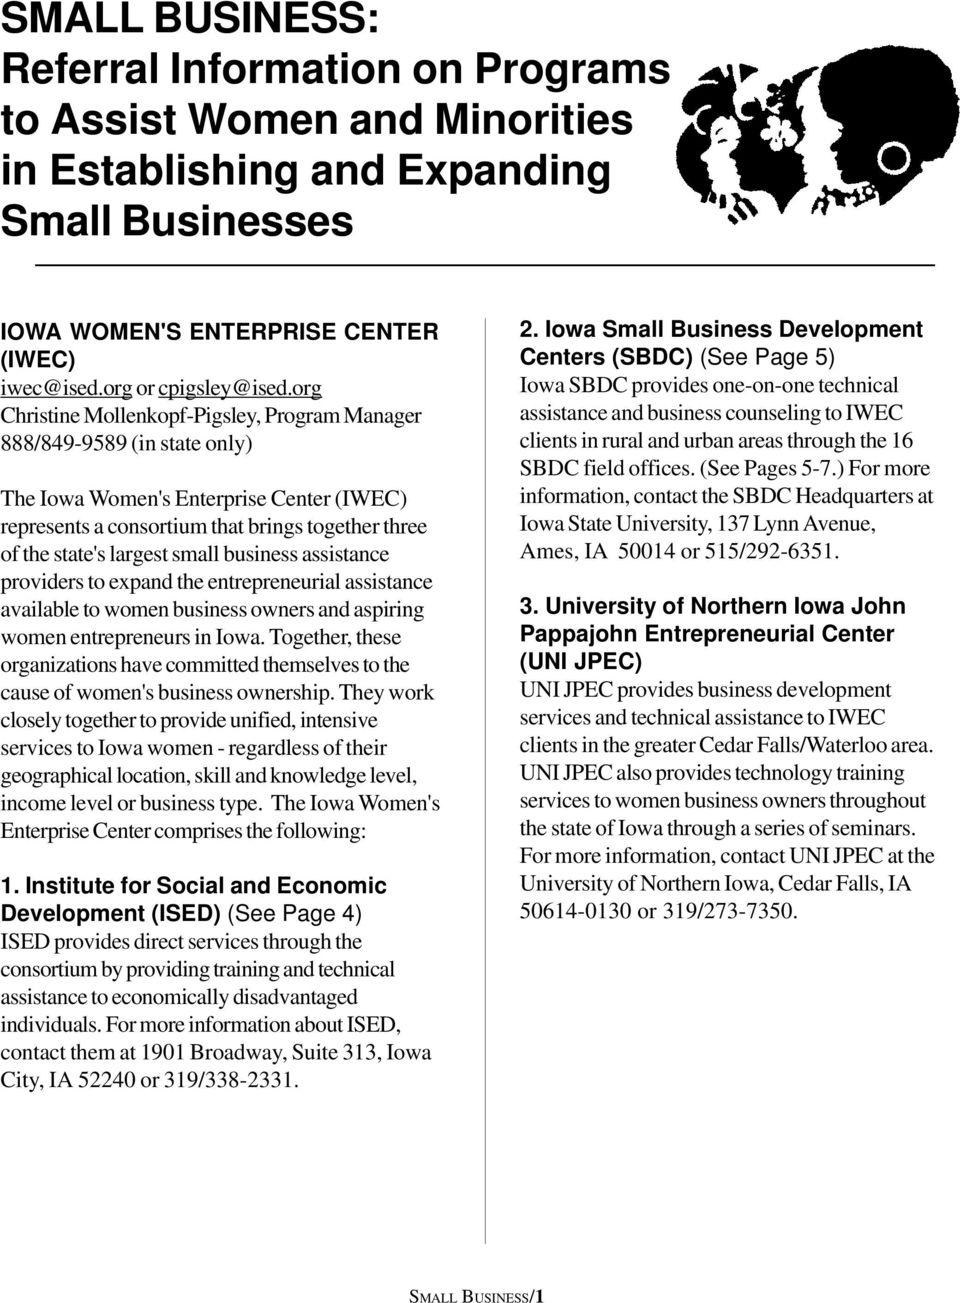 small business assistance providers to expand the entrepreneurial assistance available to women business owners and aspiring women entrepreneurs in Iowa.